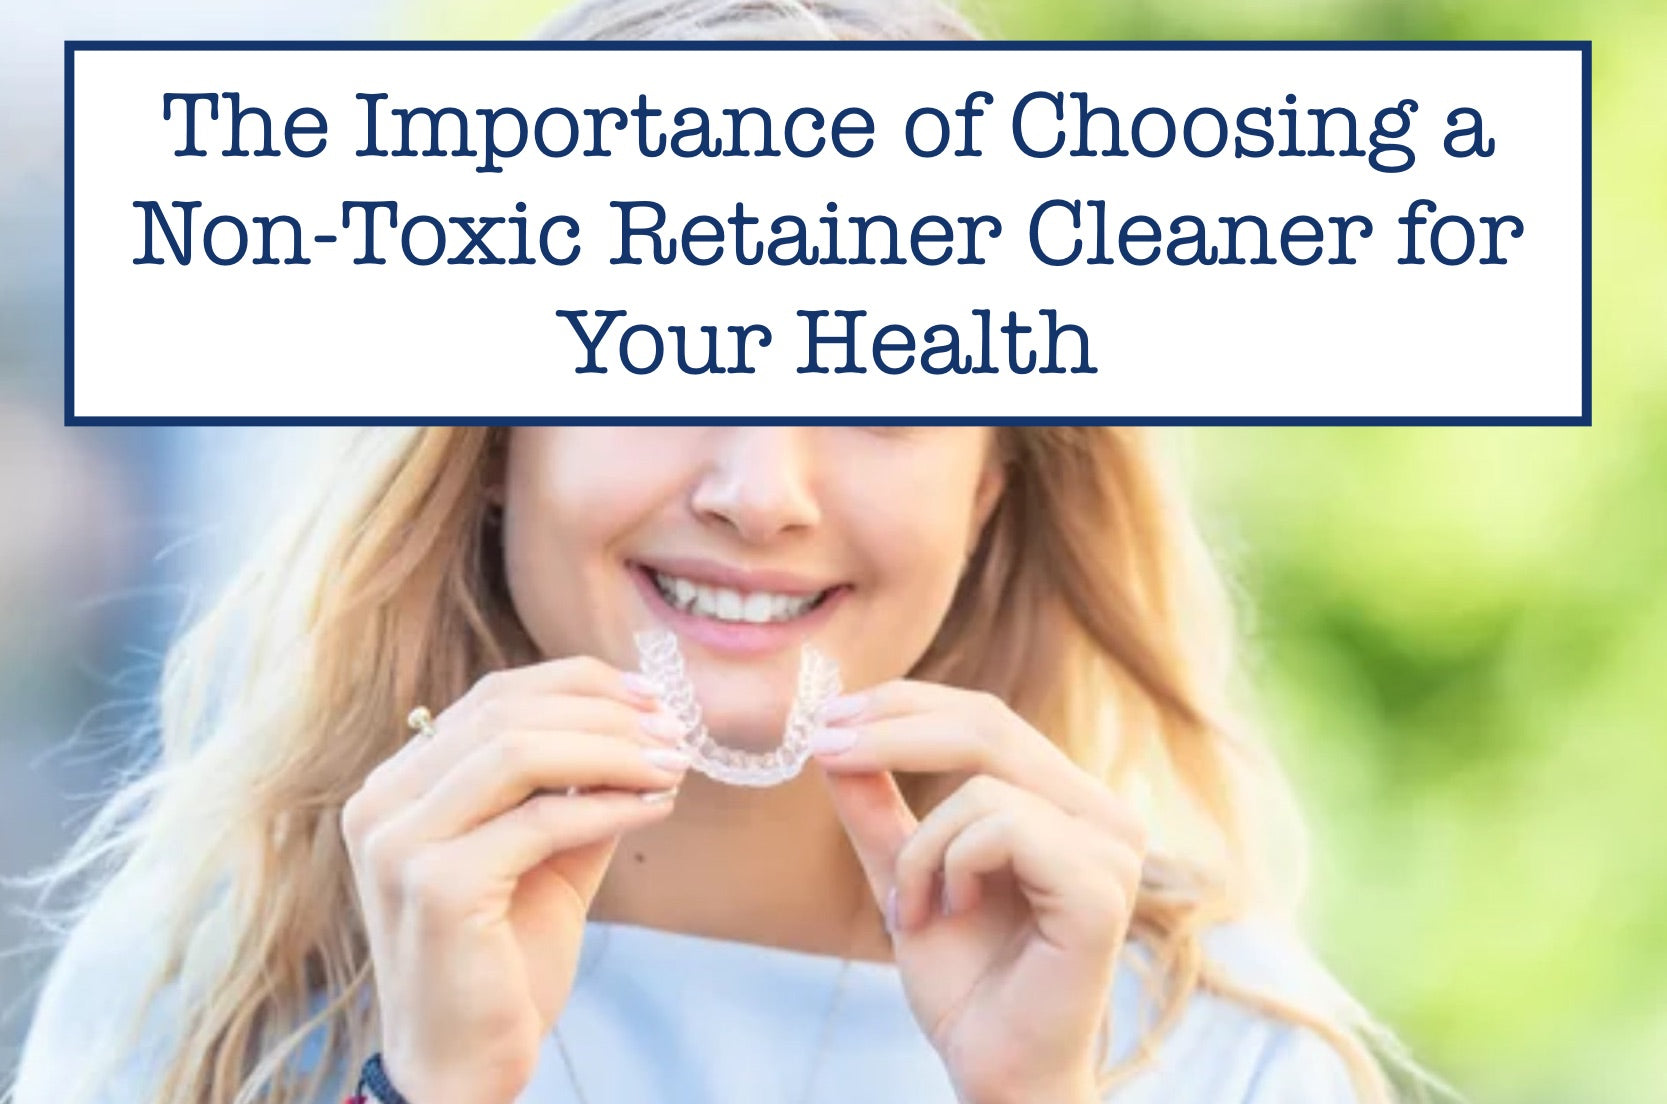 The Importance of Choosing a Non-Toxic Retainer Cleaner for Your Health